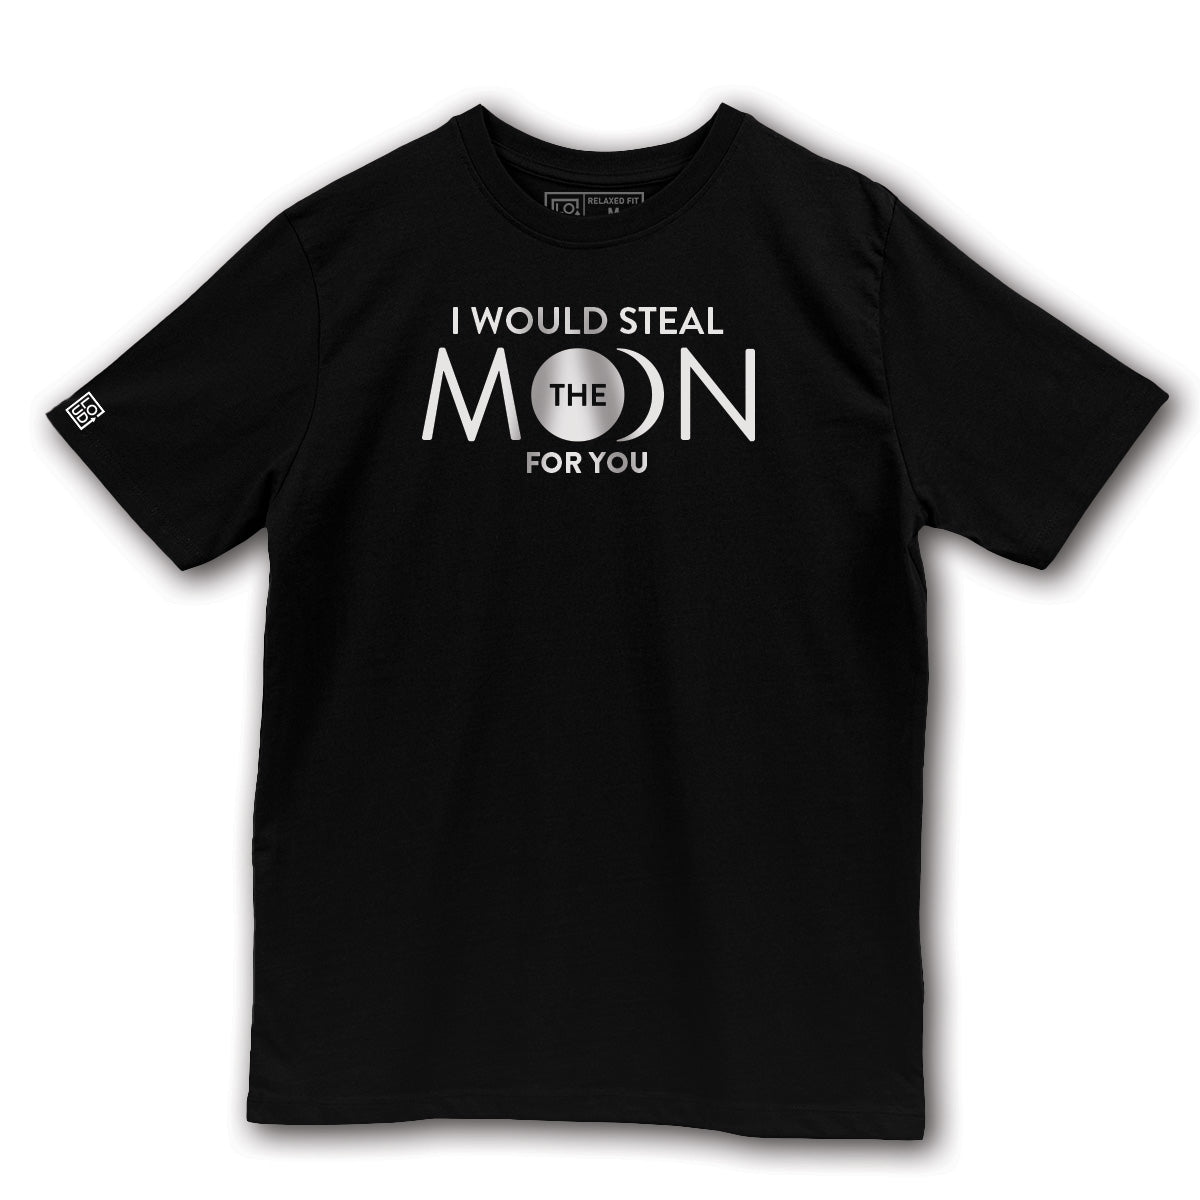 "I Would Steal The Moon For You" Unisex T-Shirt